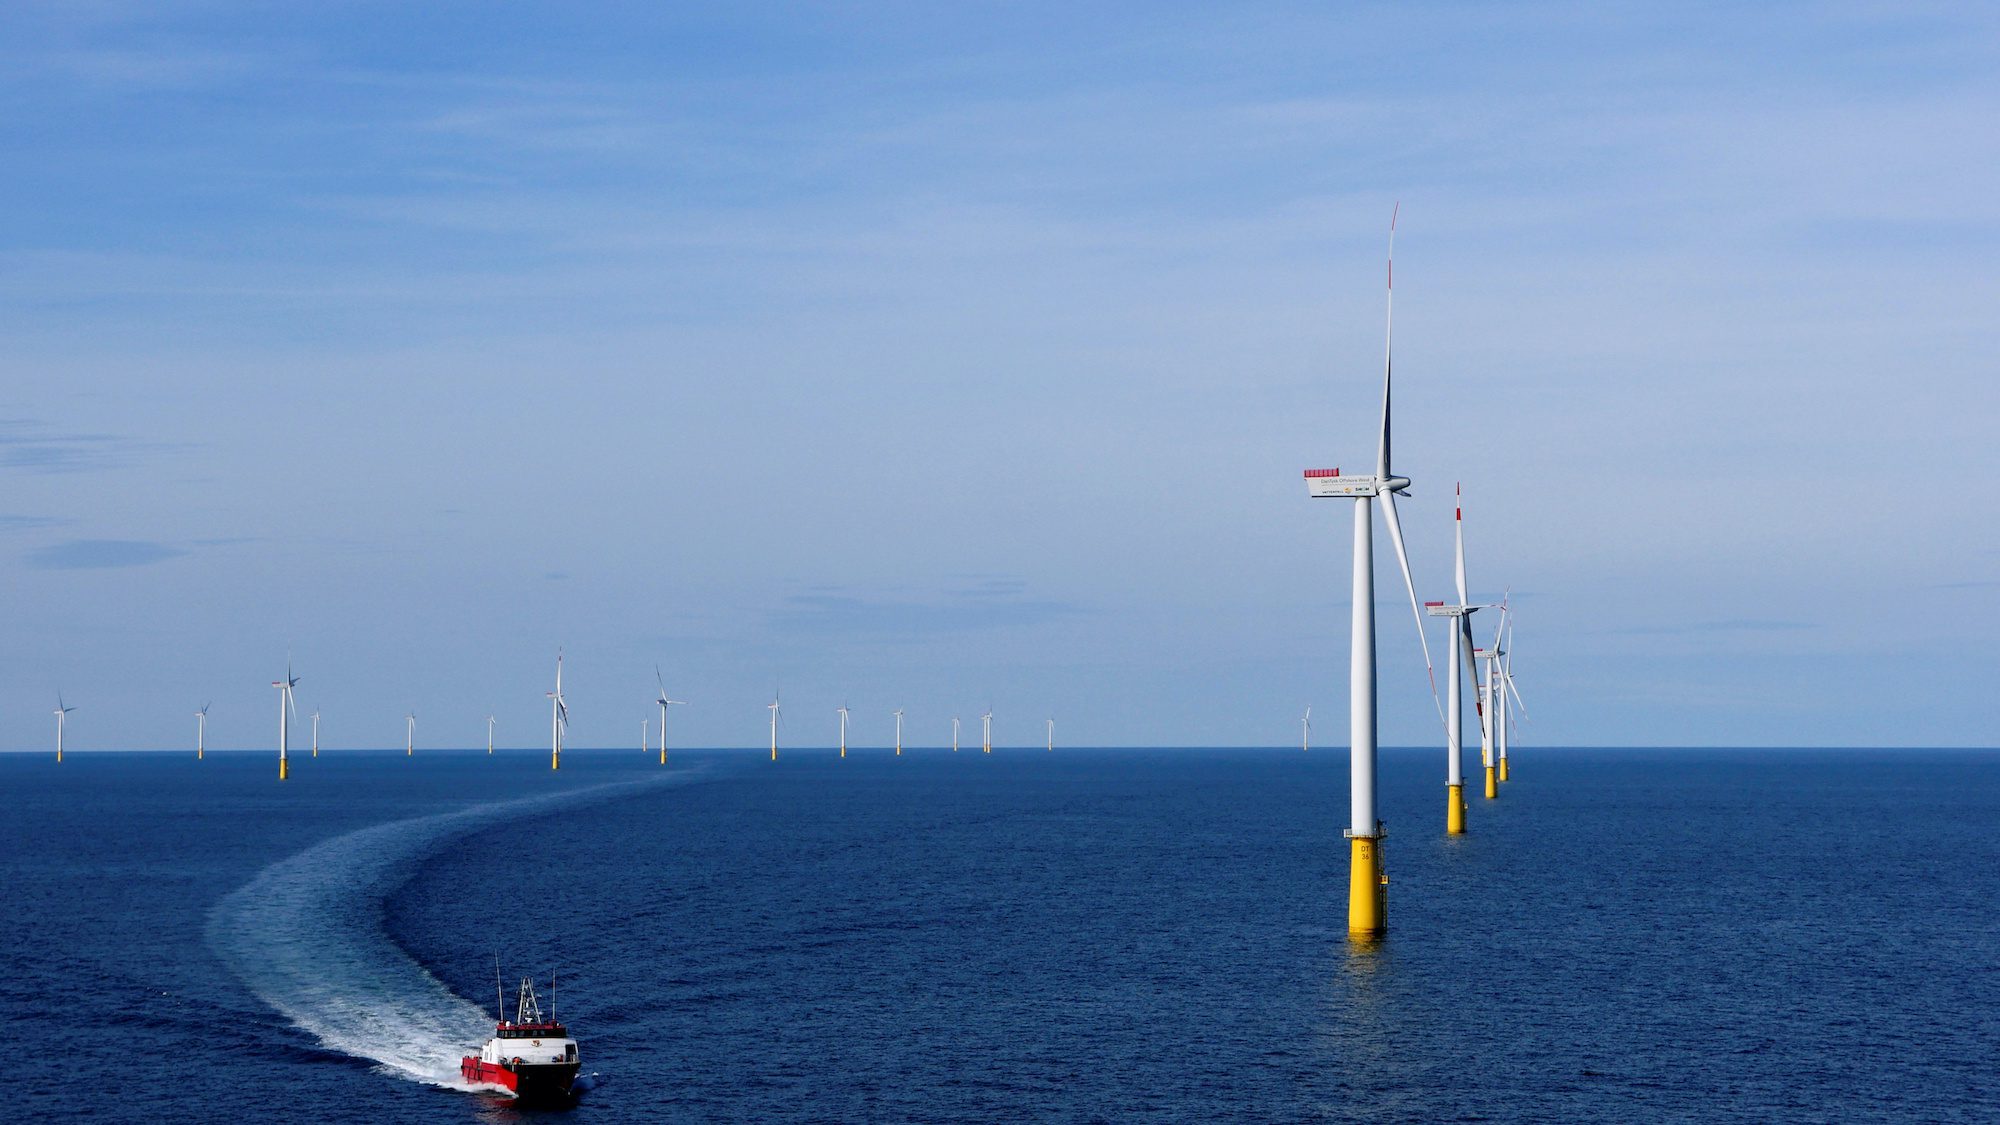 North Sea Countries Plan Tenfold Increase in Offshore Wind Energy Capacity